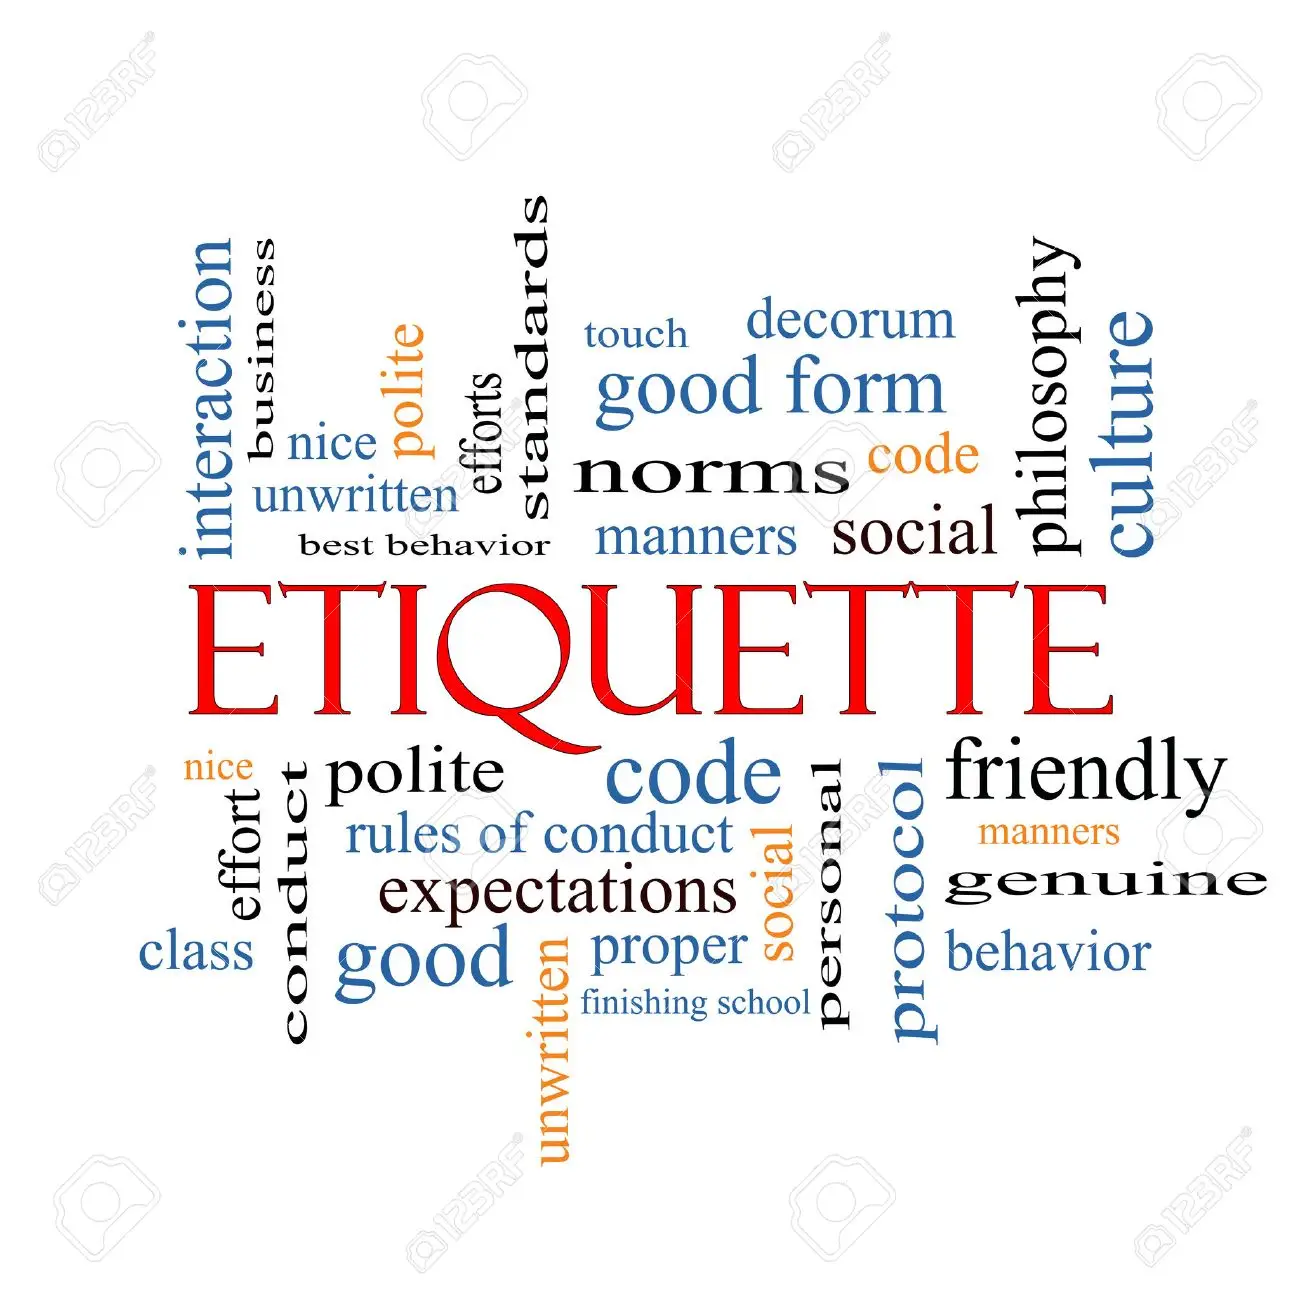 https://cliseetiquette.com/wp-content/uploads/2021/12/etiquette-word-cloud-concept-with-great-terms-such-as-manners-polite-social-and-more-.webp